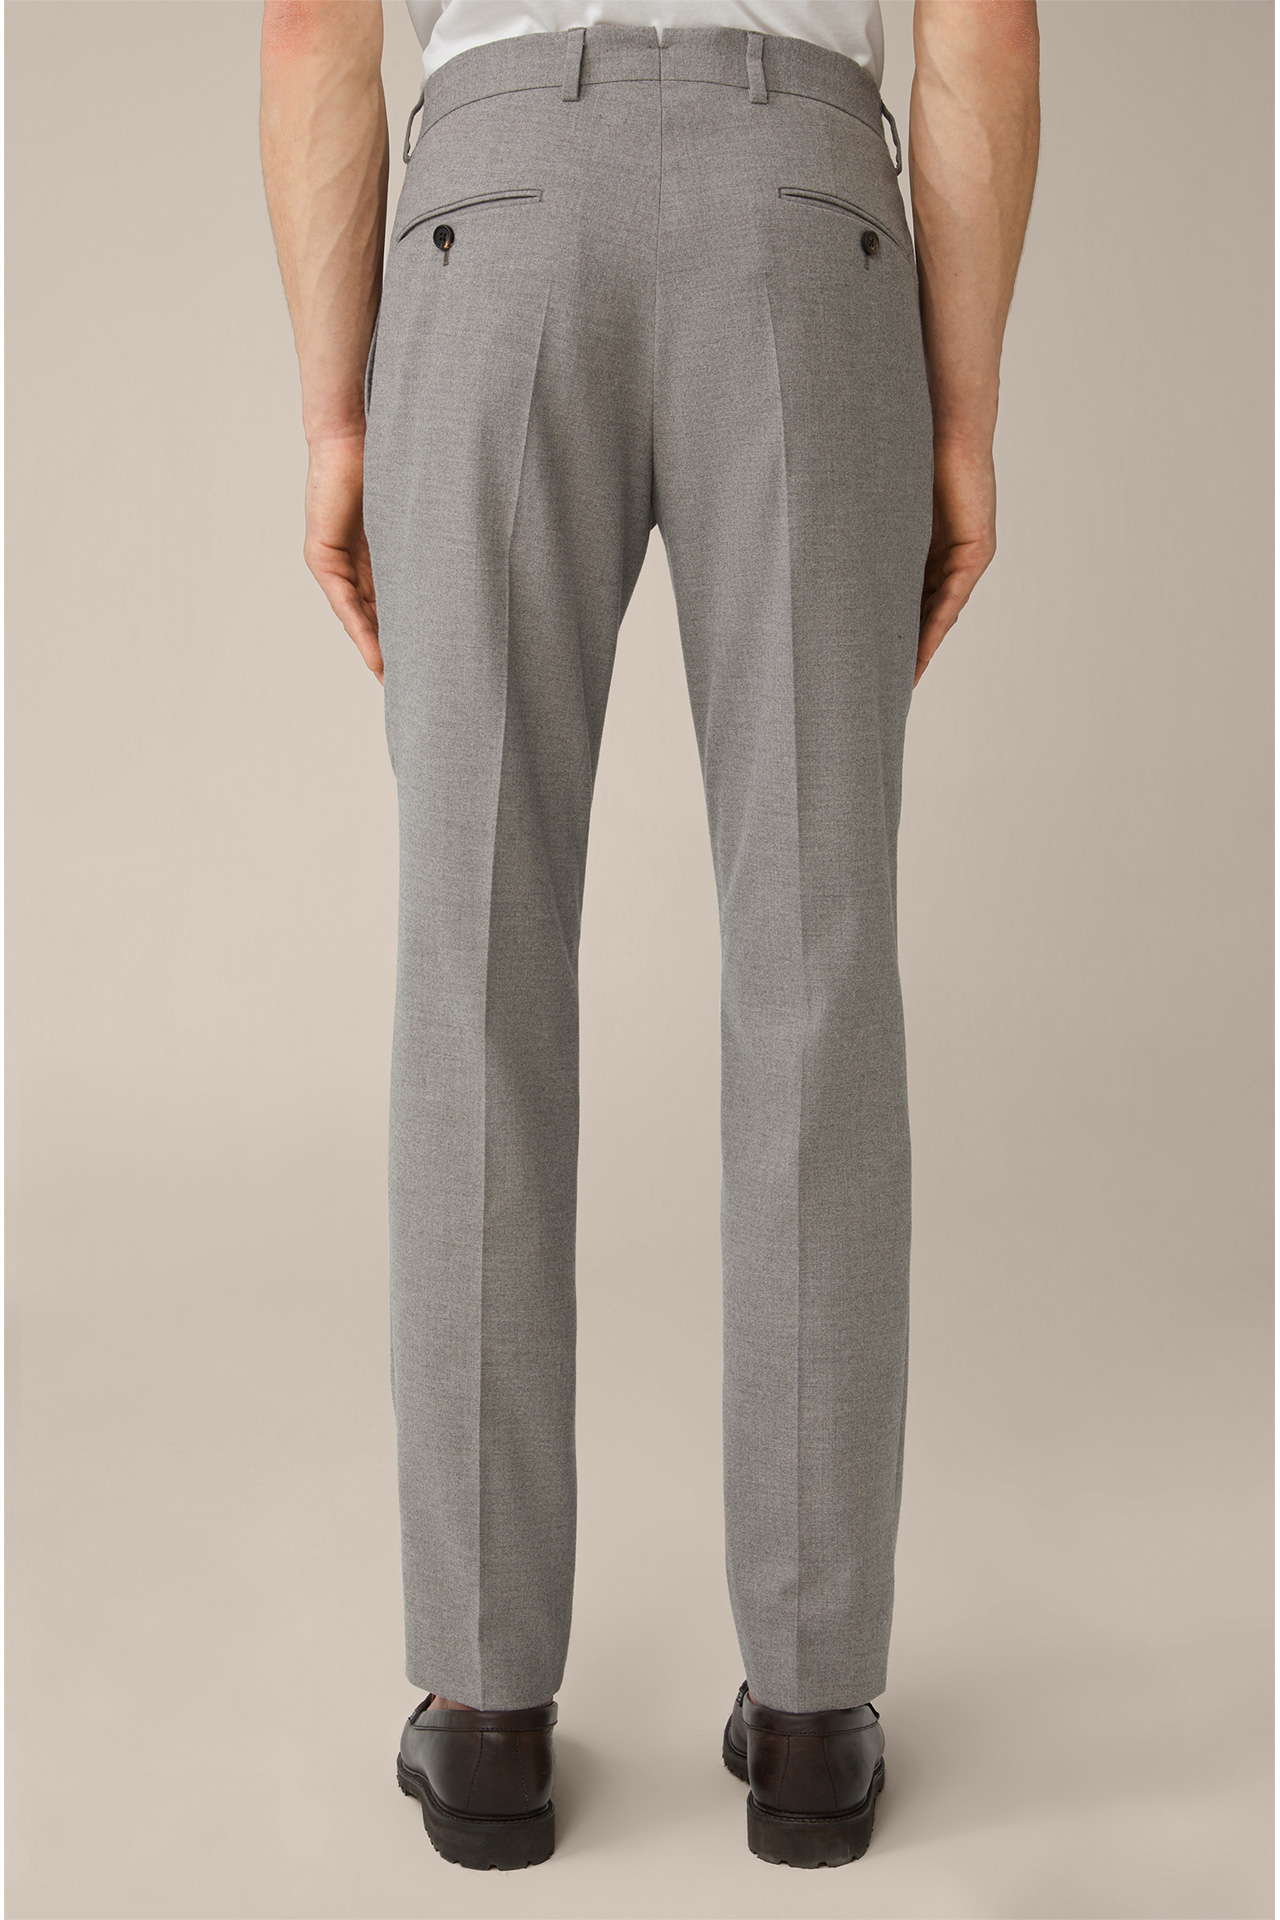  Santios Wool Flannel Modular Trousers with Stretch in Grey